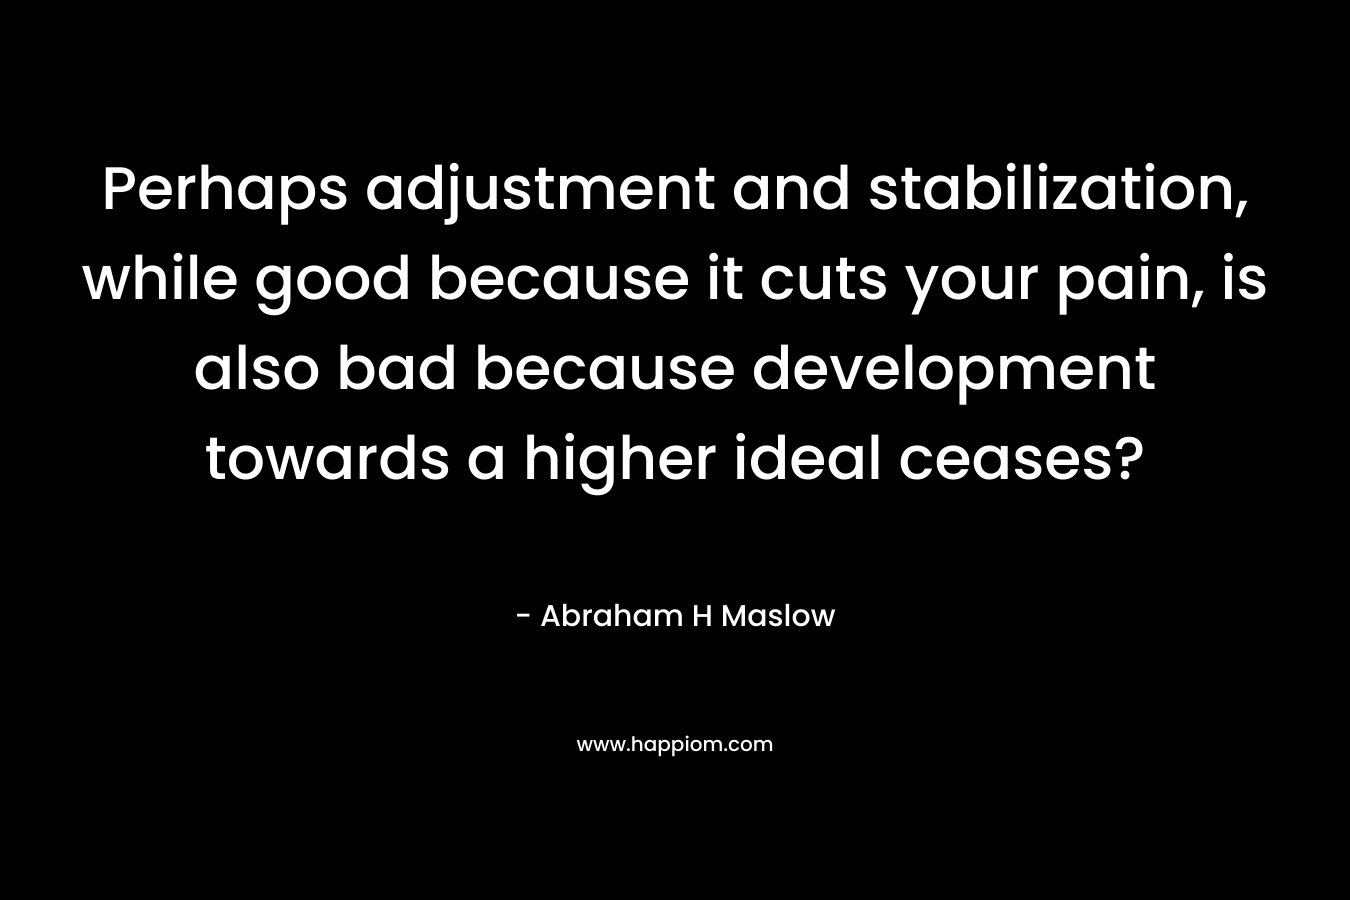 Perhaps adjustment and stabilization, while good because it cuts your pain, is also bad because development towards a higher ideal ceases? – Abraham H Maslow